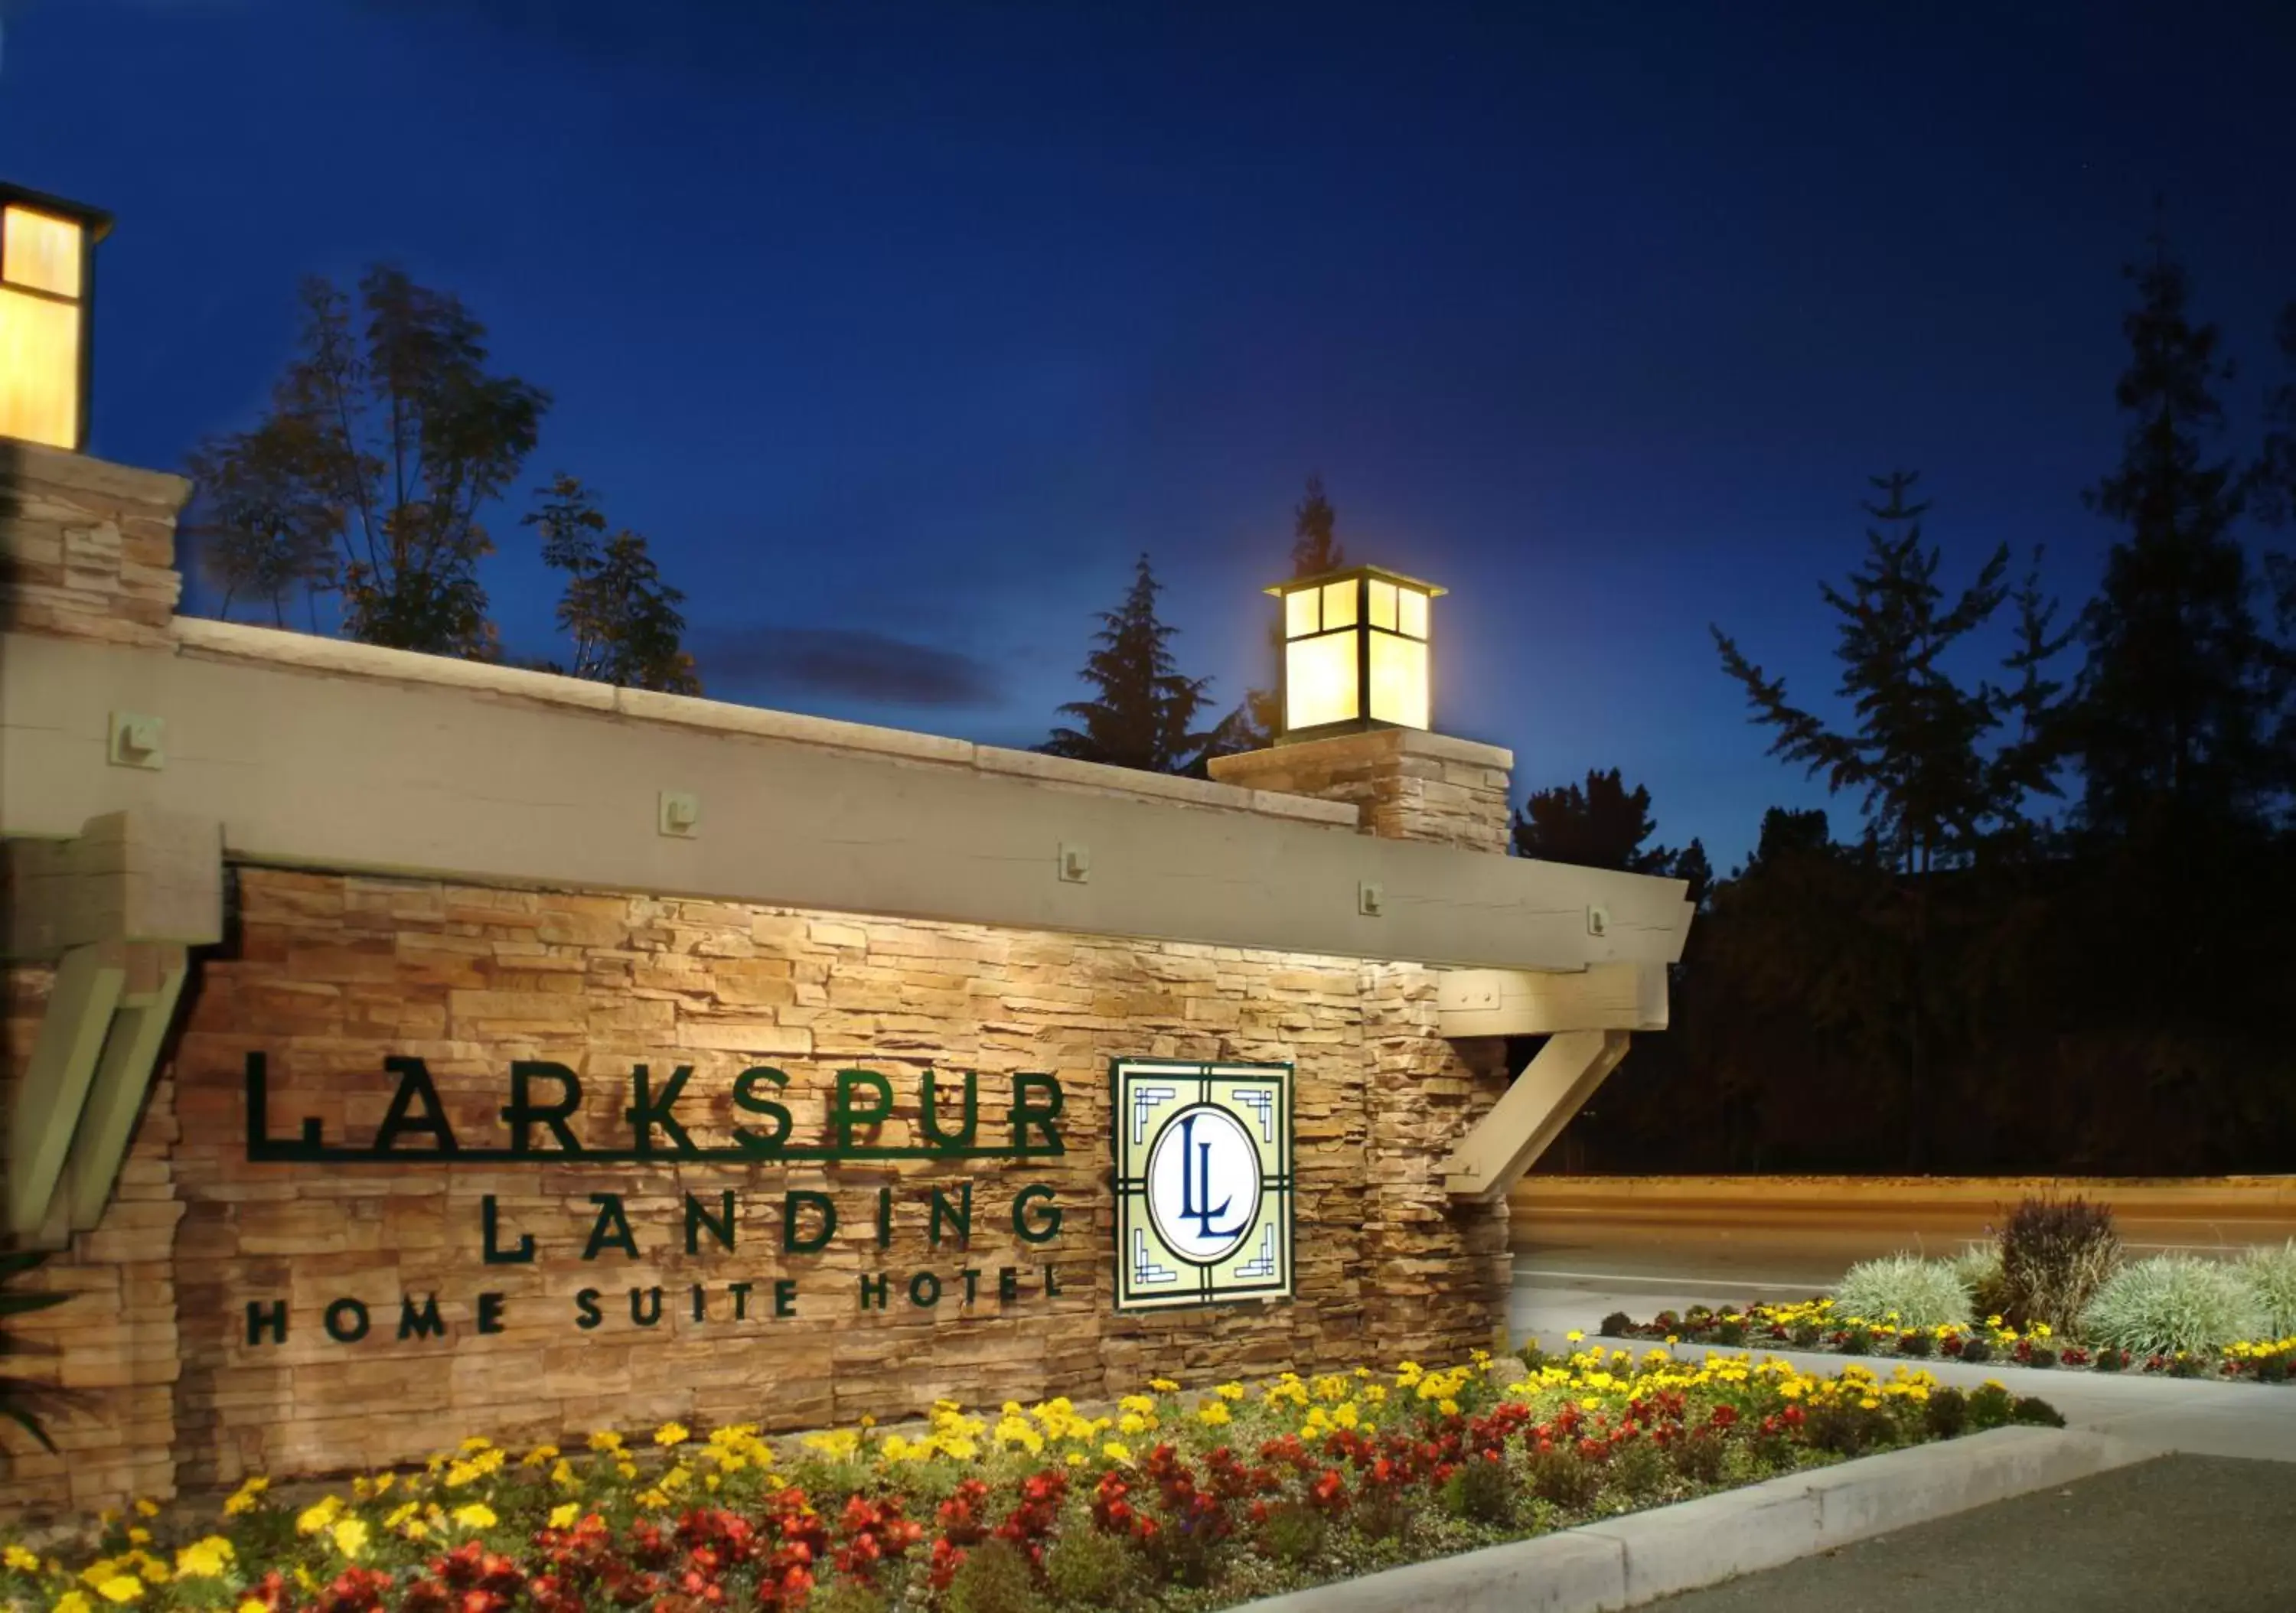 Property logo or sign, Property Building in Larkspur Landing Campbell-An All-Suite Hotel